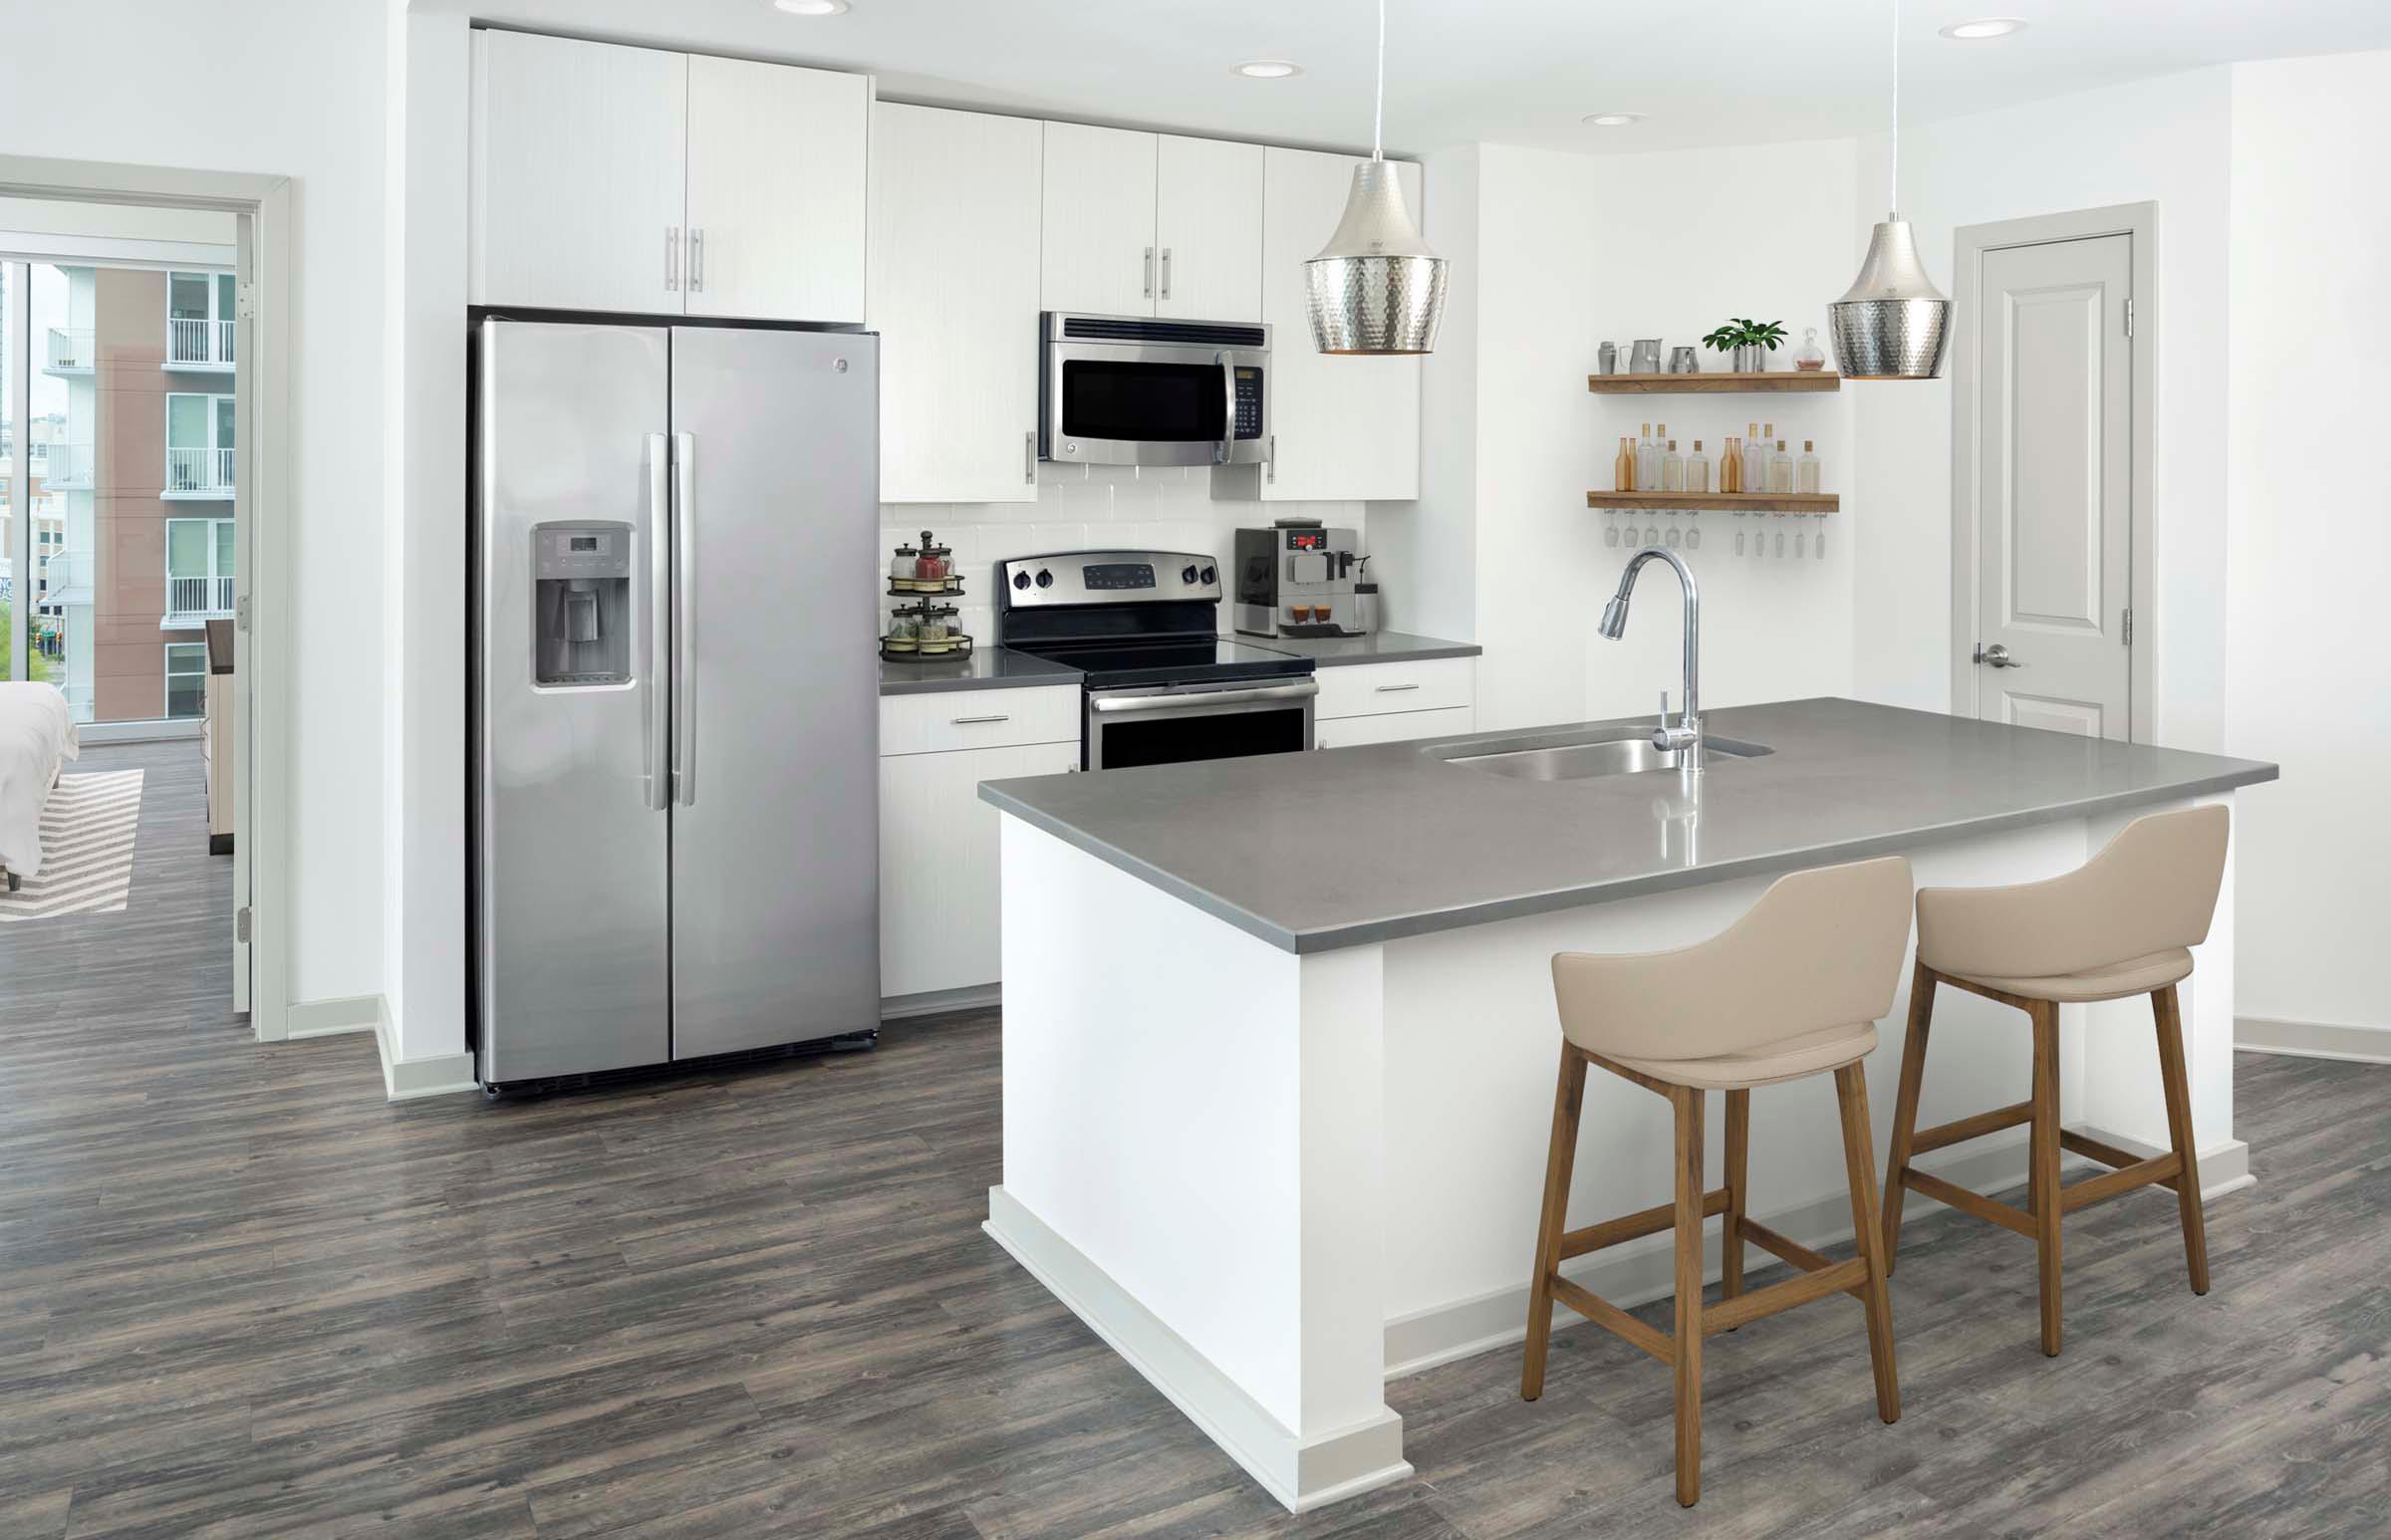 Two-bedroom kitchen with gray countertops, light cabinets, white backsplash and stainless steel appliances